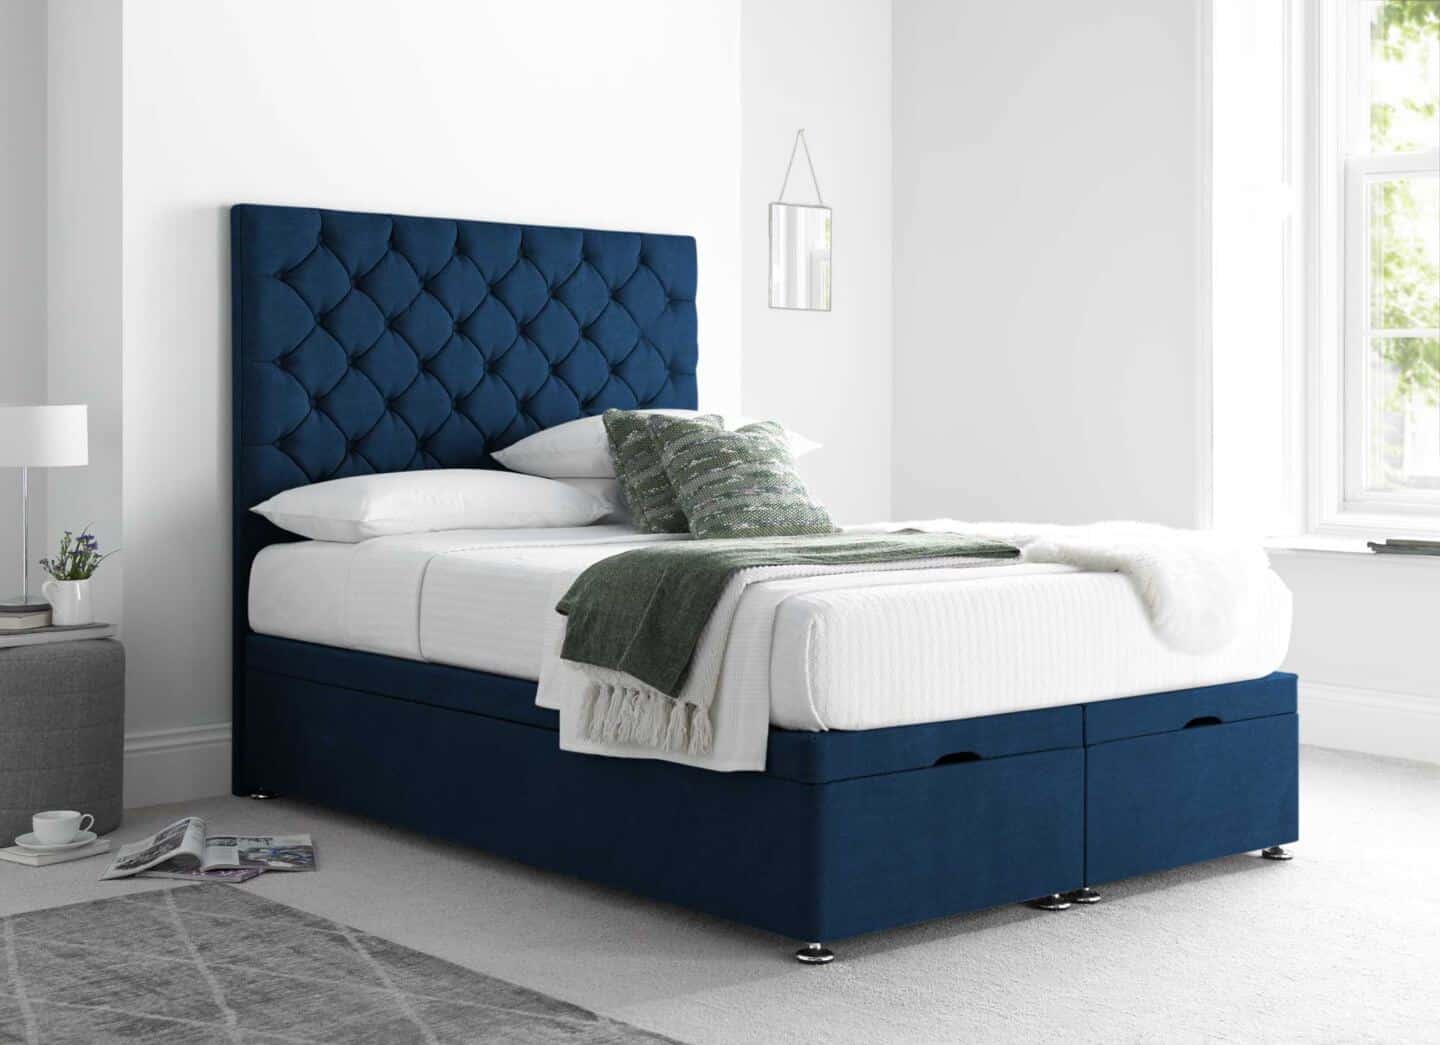 A blue ottoman bed with white bedding    and a tall tufted headboard in a large white airy bedroom